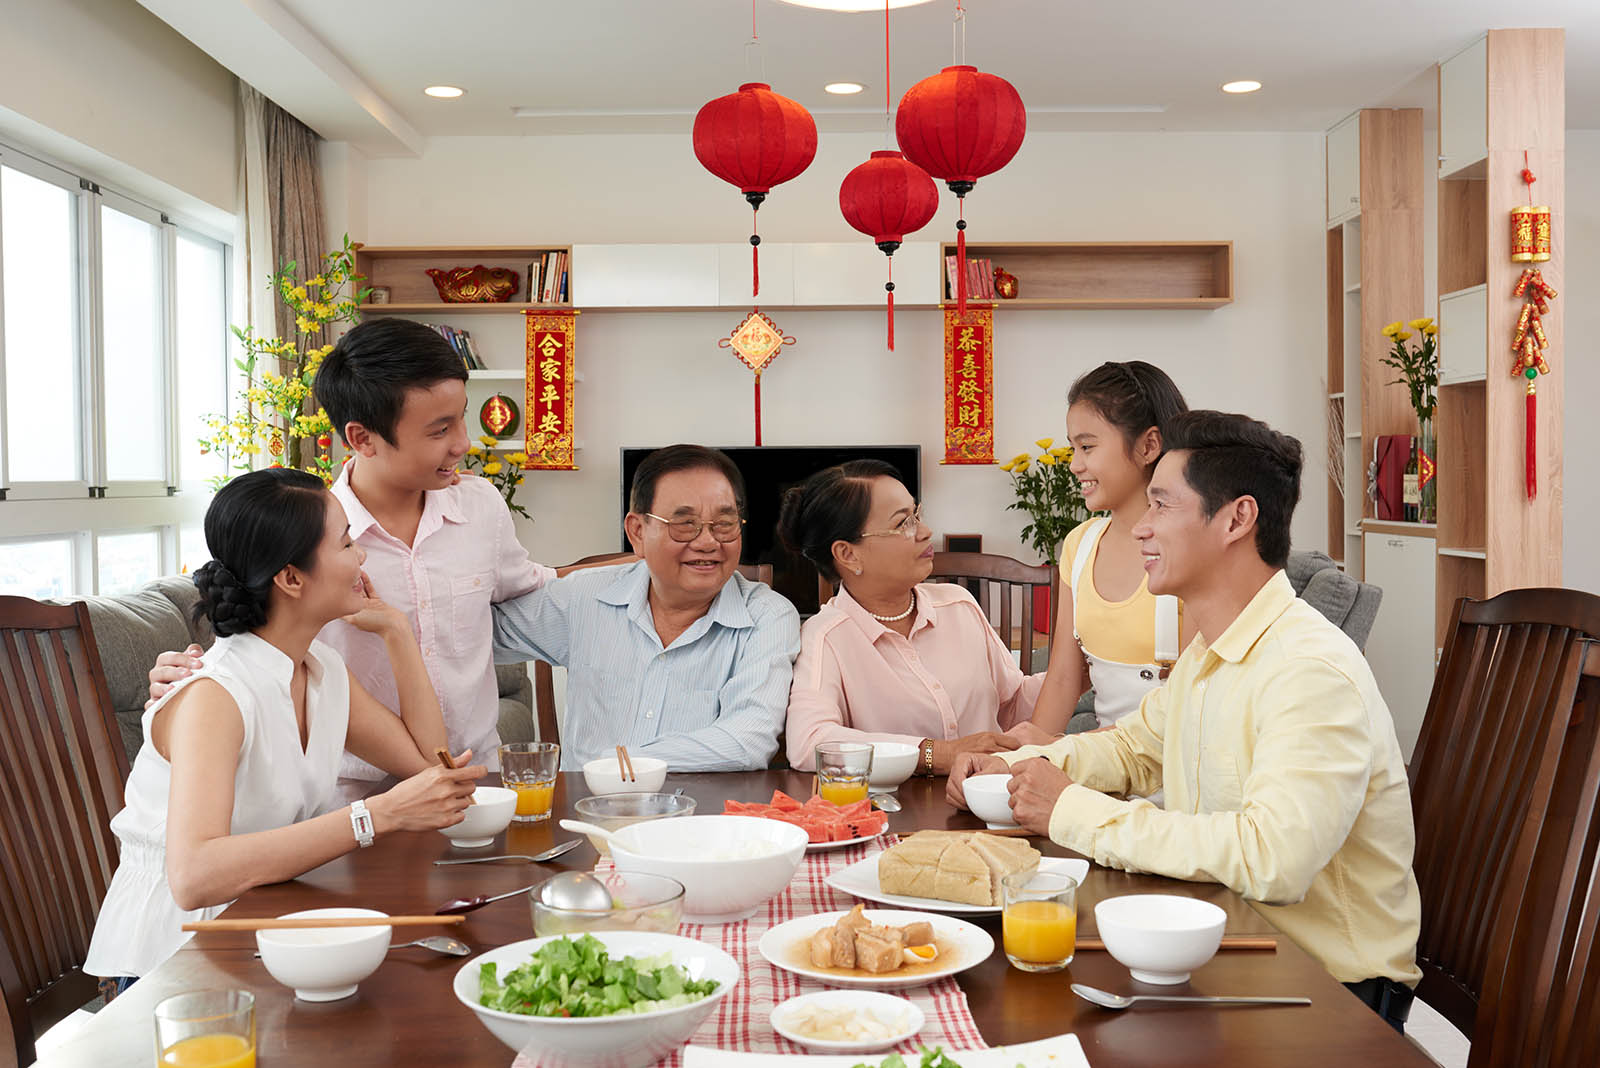 joy-family-laughter-chinese-new-year.jpg